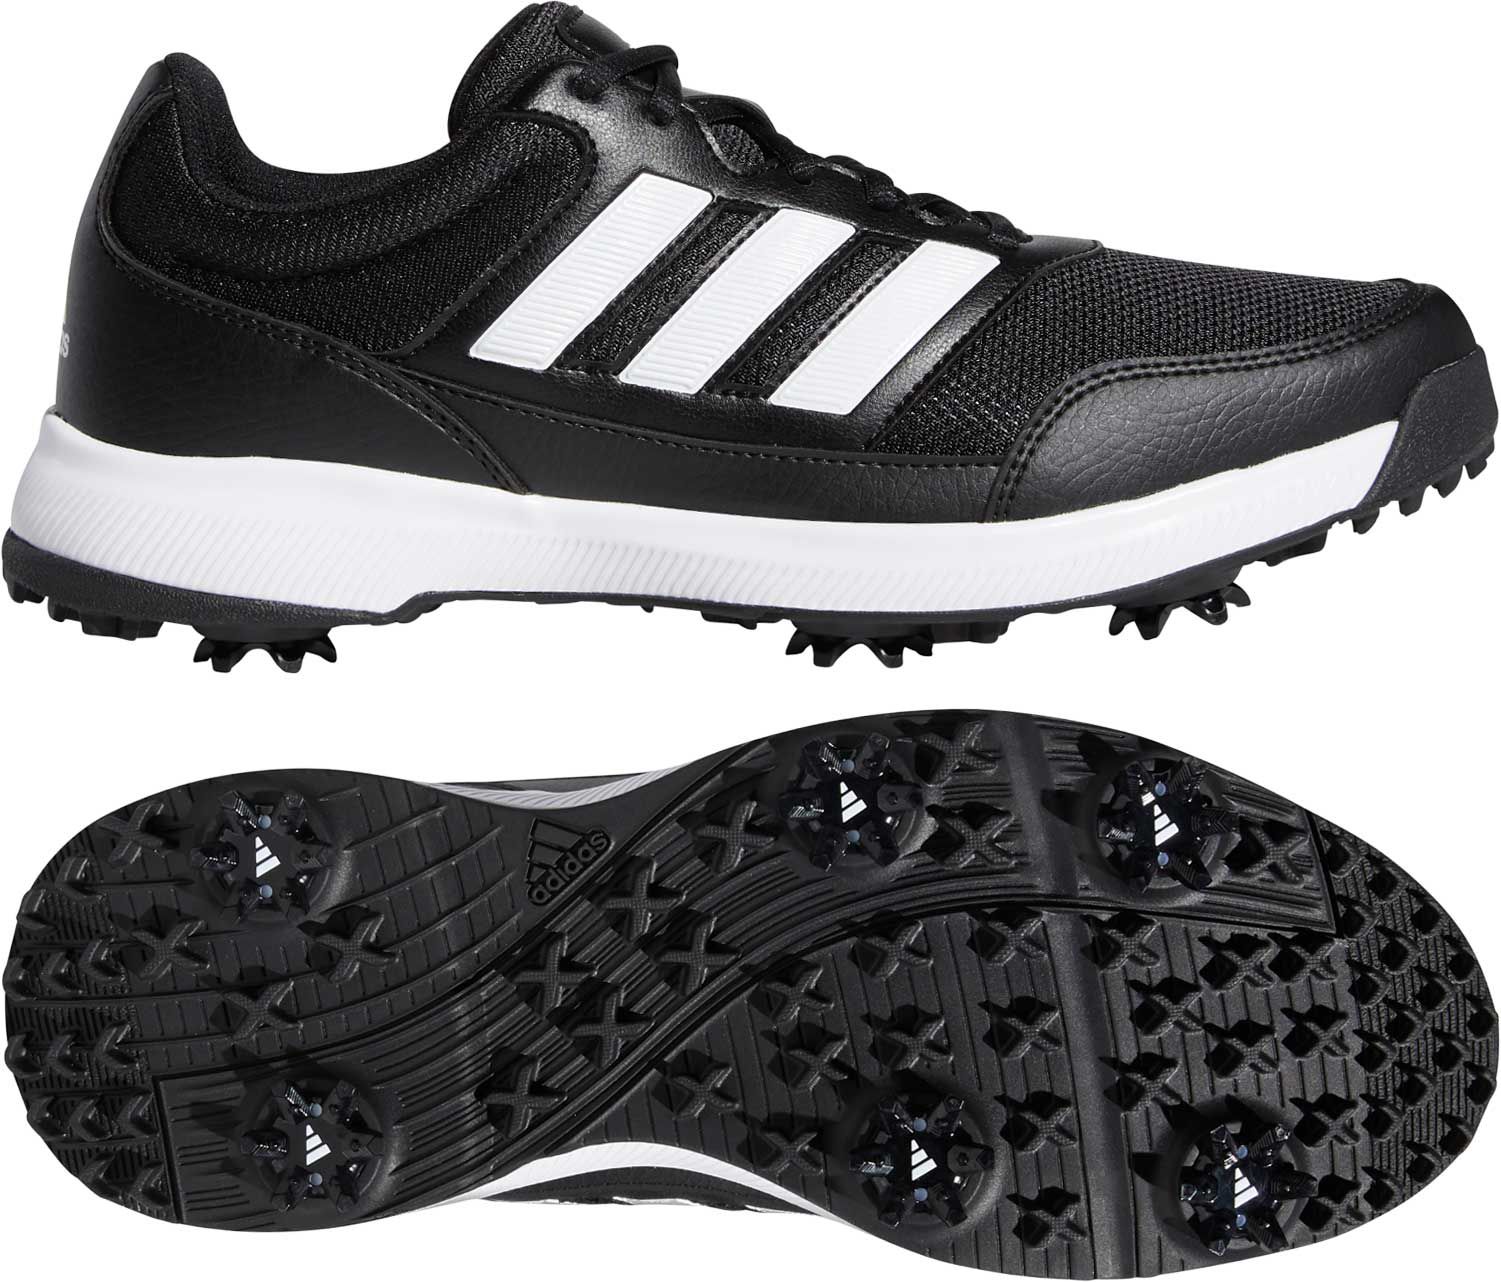 adidas extra wide golf shoes